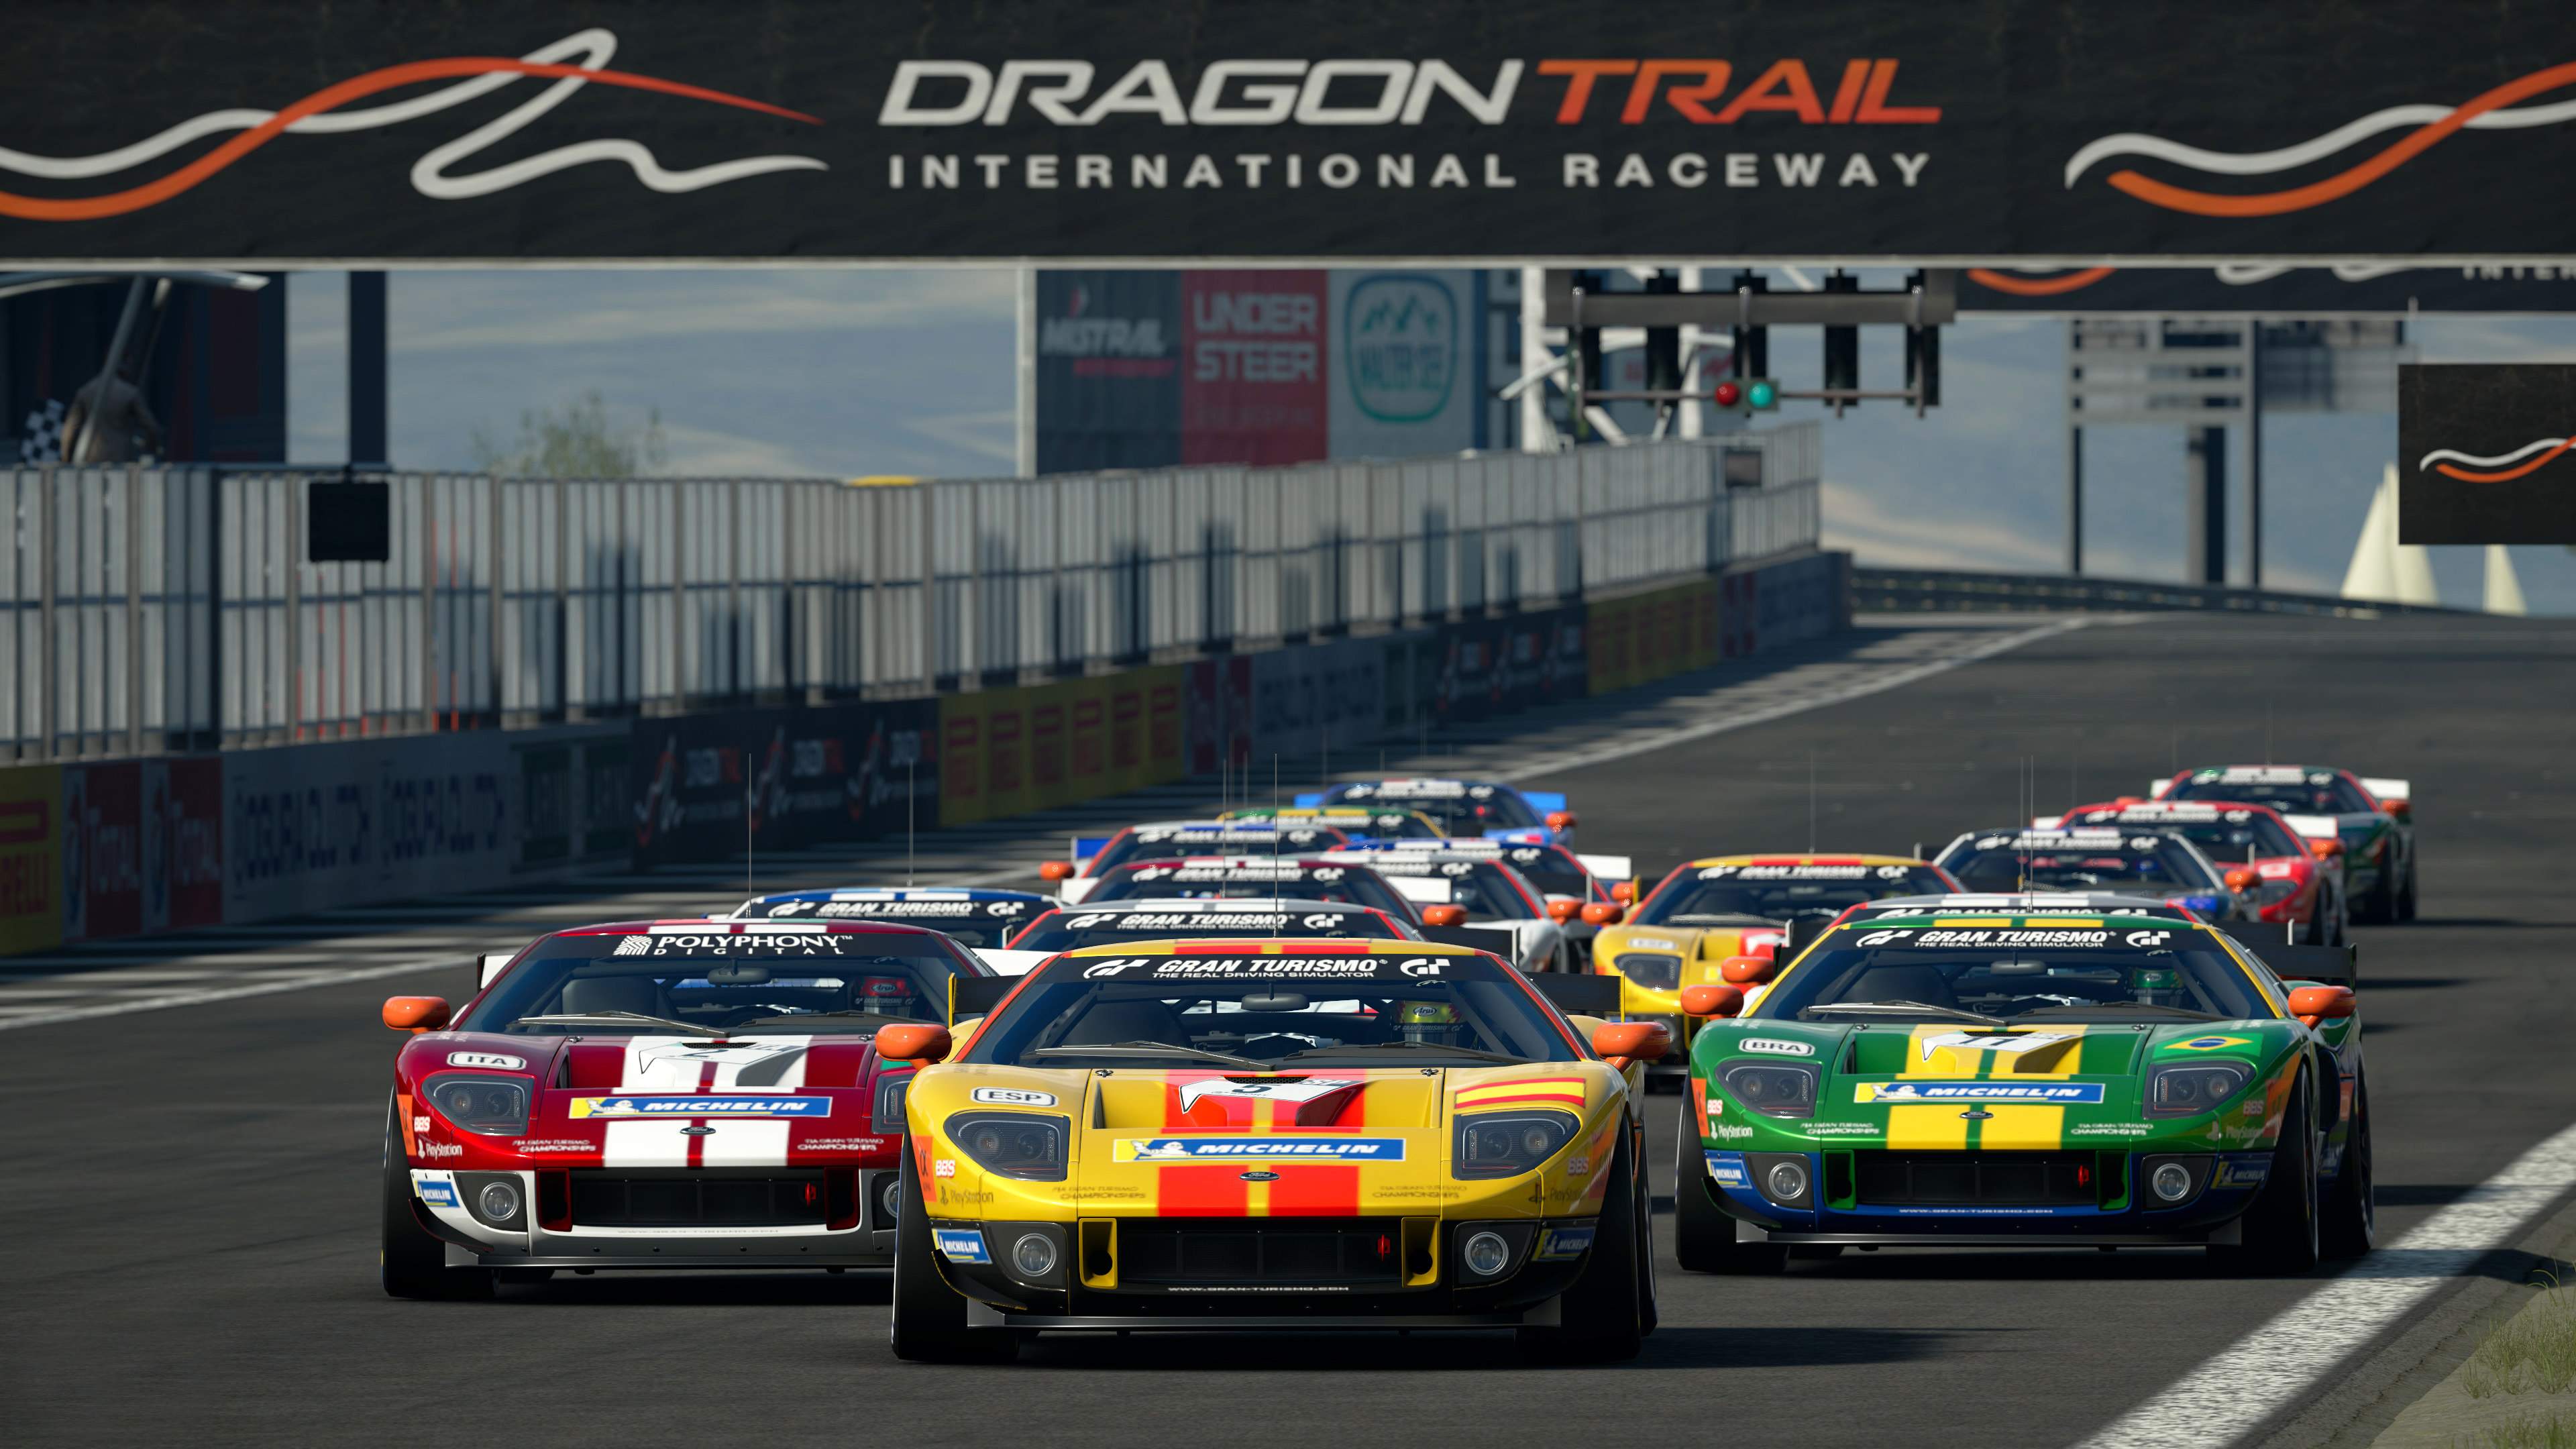 Endurance Racing: Gran Turismo 7, Multiplayer Video Game, Vehicle Simulation, Sony Interactive Entertainment, 2022, Dragon Trail. 3840x2160 4K Background.